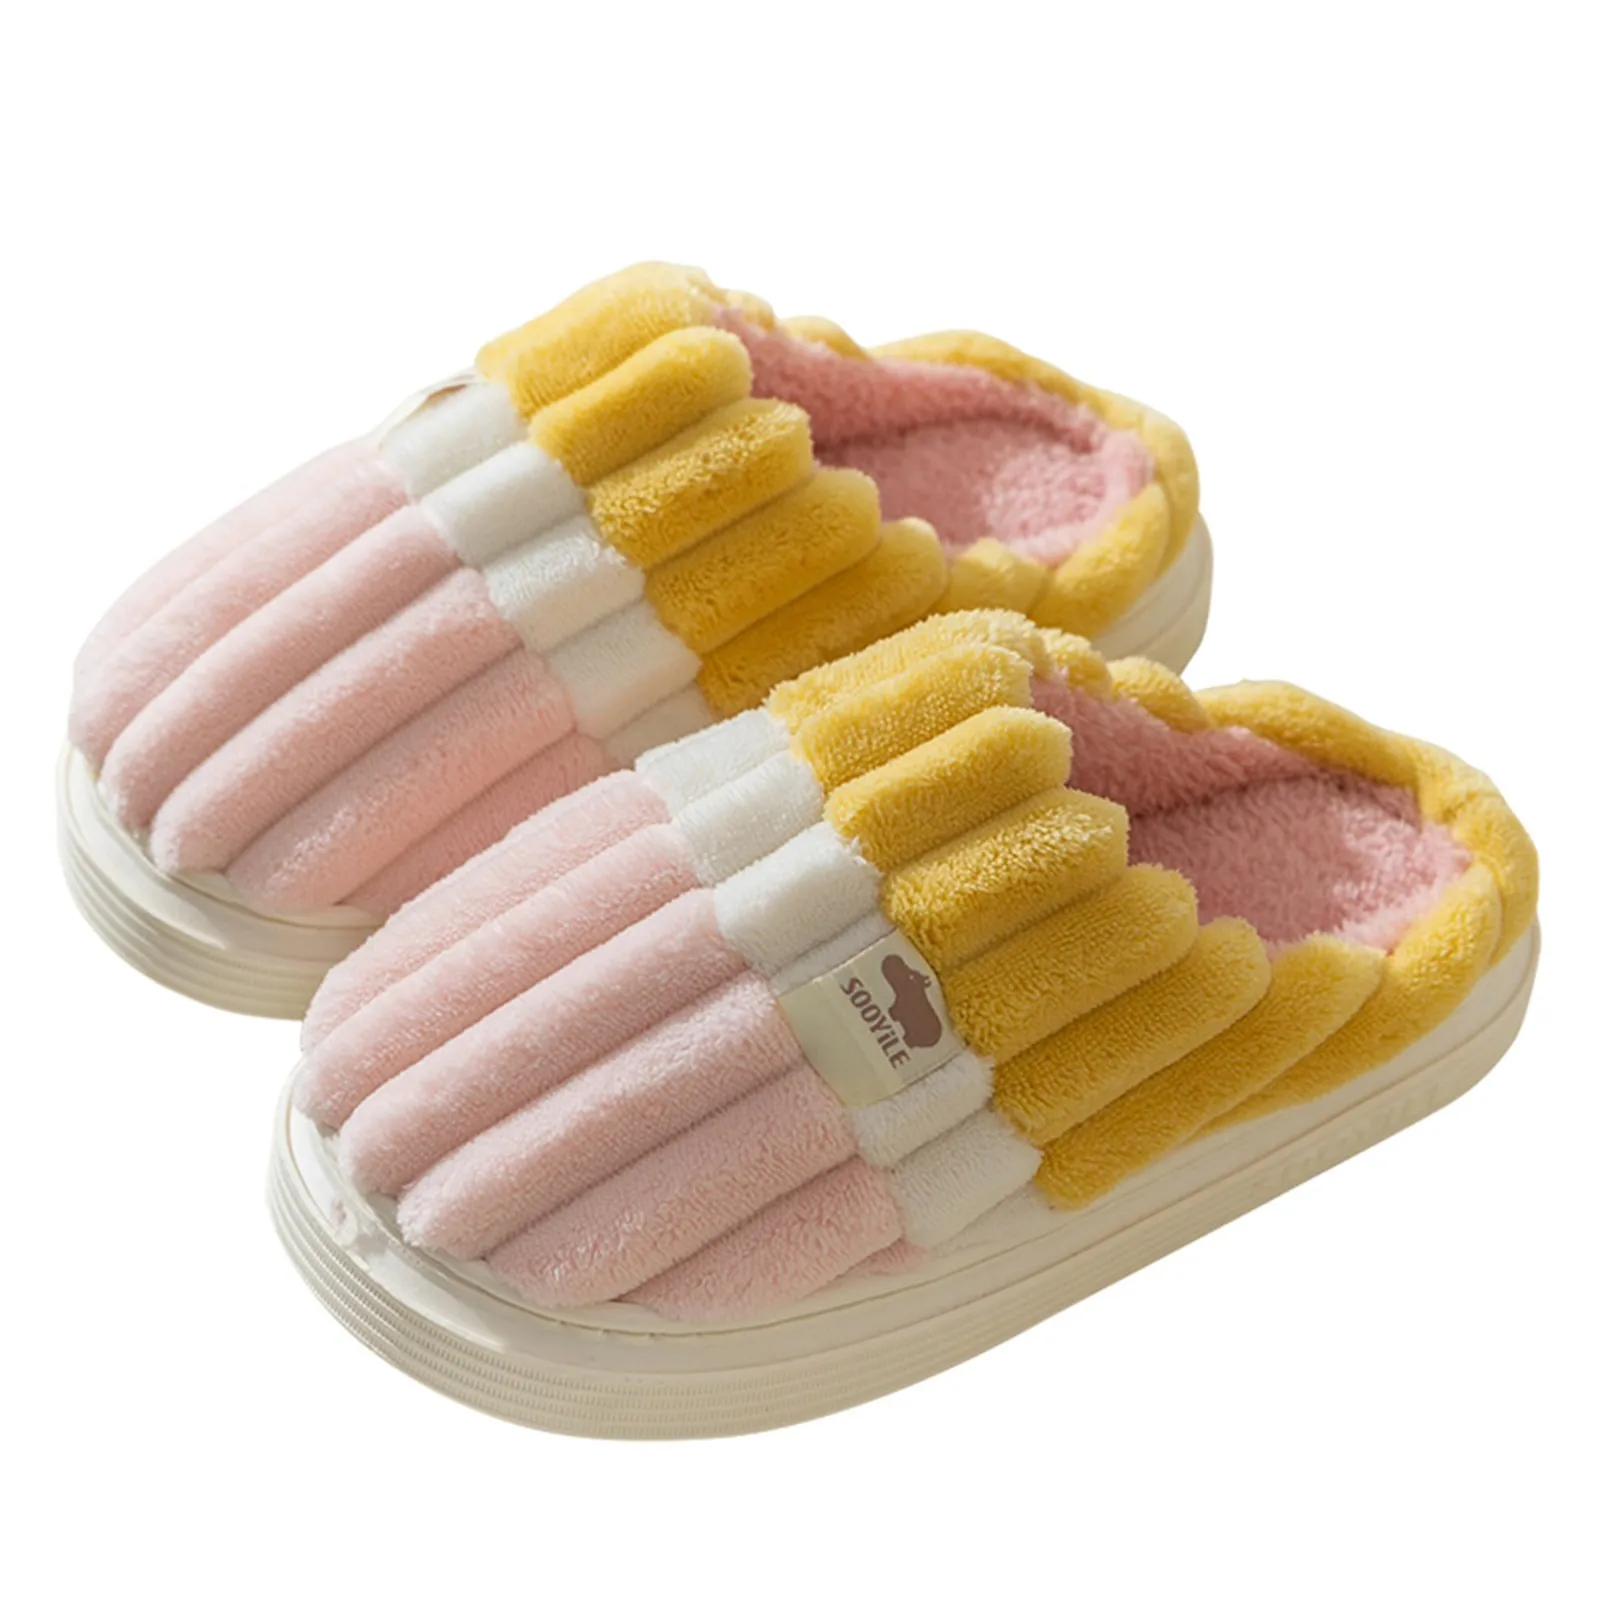 Couples Women Keep Warm Slippers Fluffy Faux Fur Plush House Shoes Home Warm Indoor Slippers Soft Comfy Home Fur Cushion Slides 3